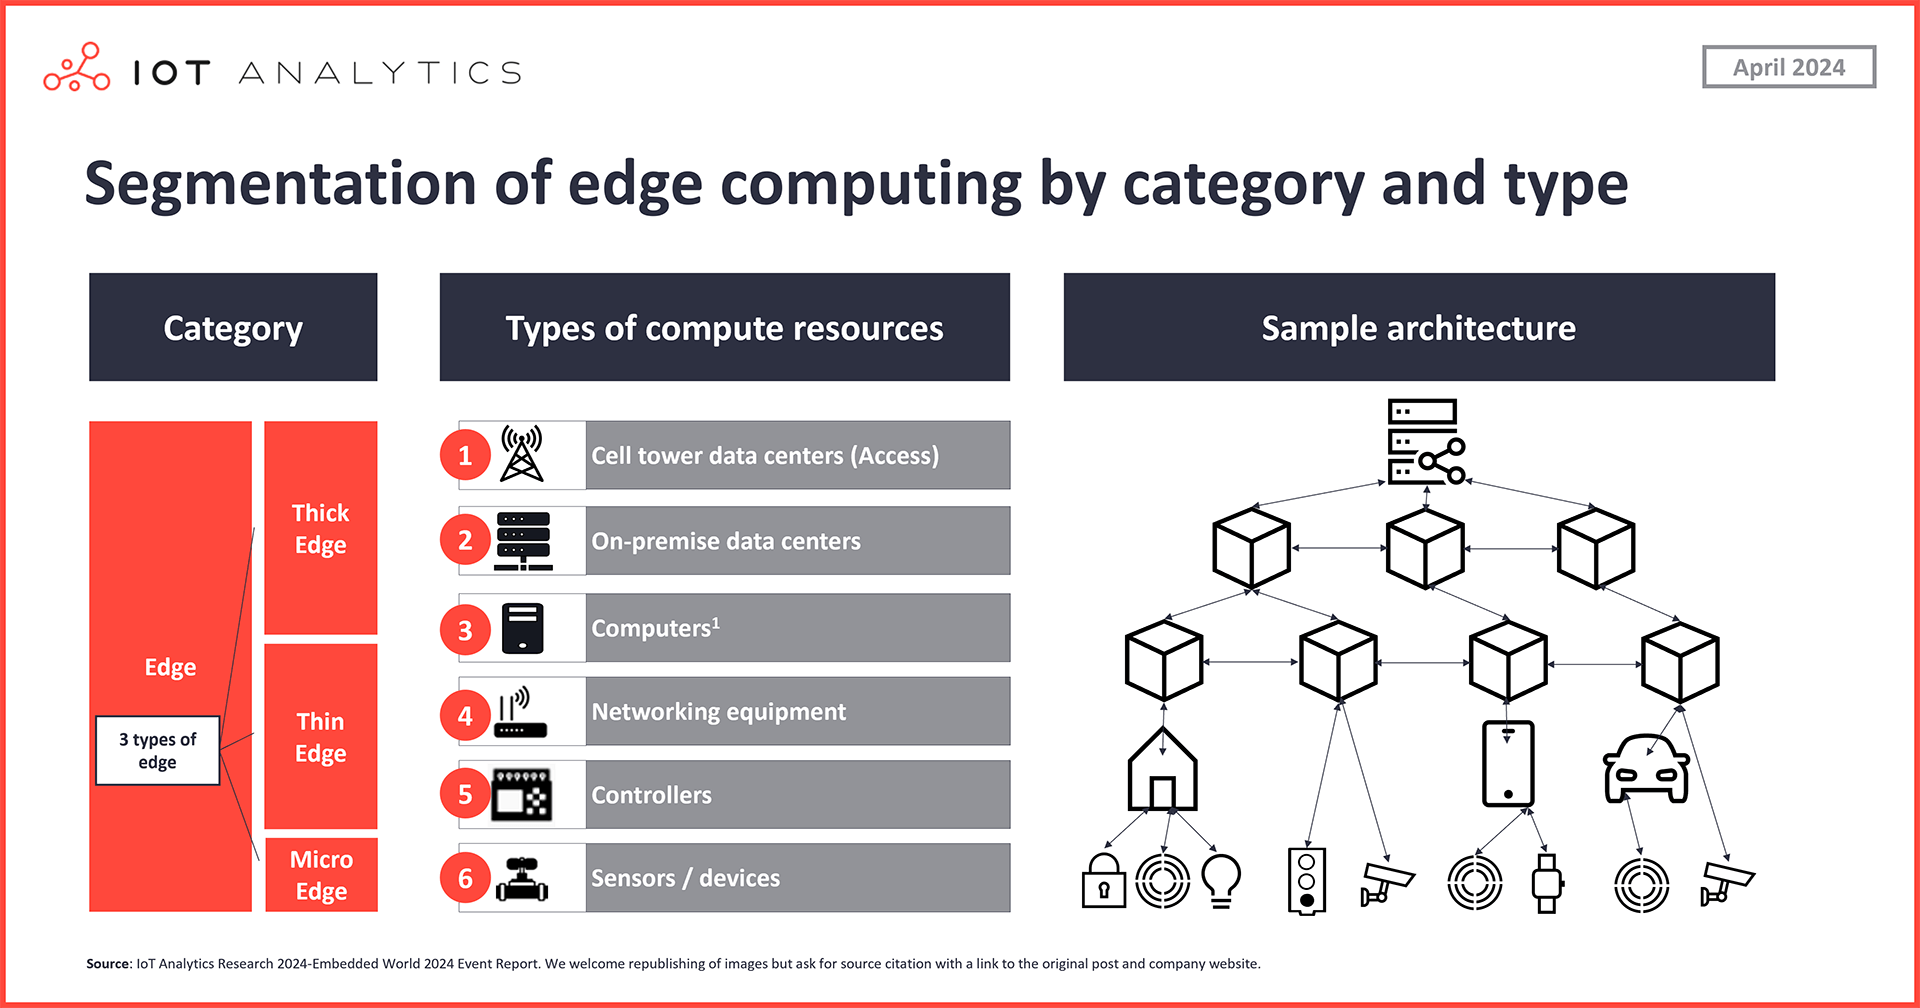 Segmentation of edge computing by category and type